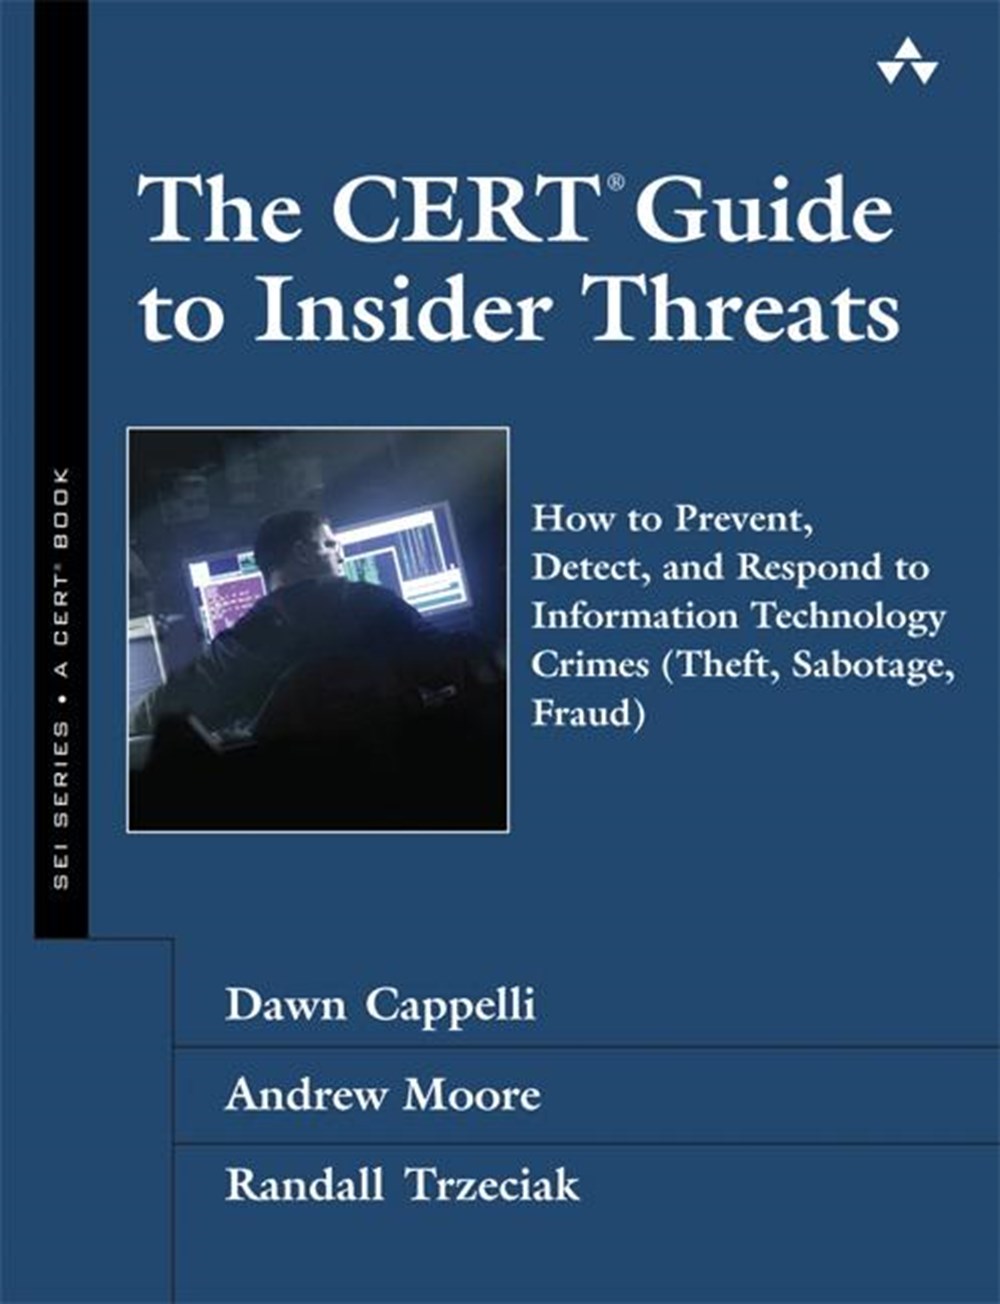 CERT Guide to Insider Threats: How to Prevent, Detect, and Respond to Information Technology Crimes 